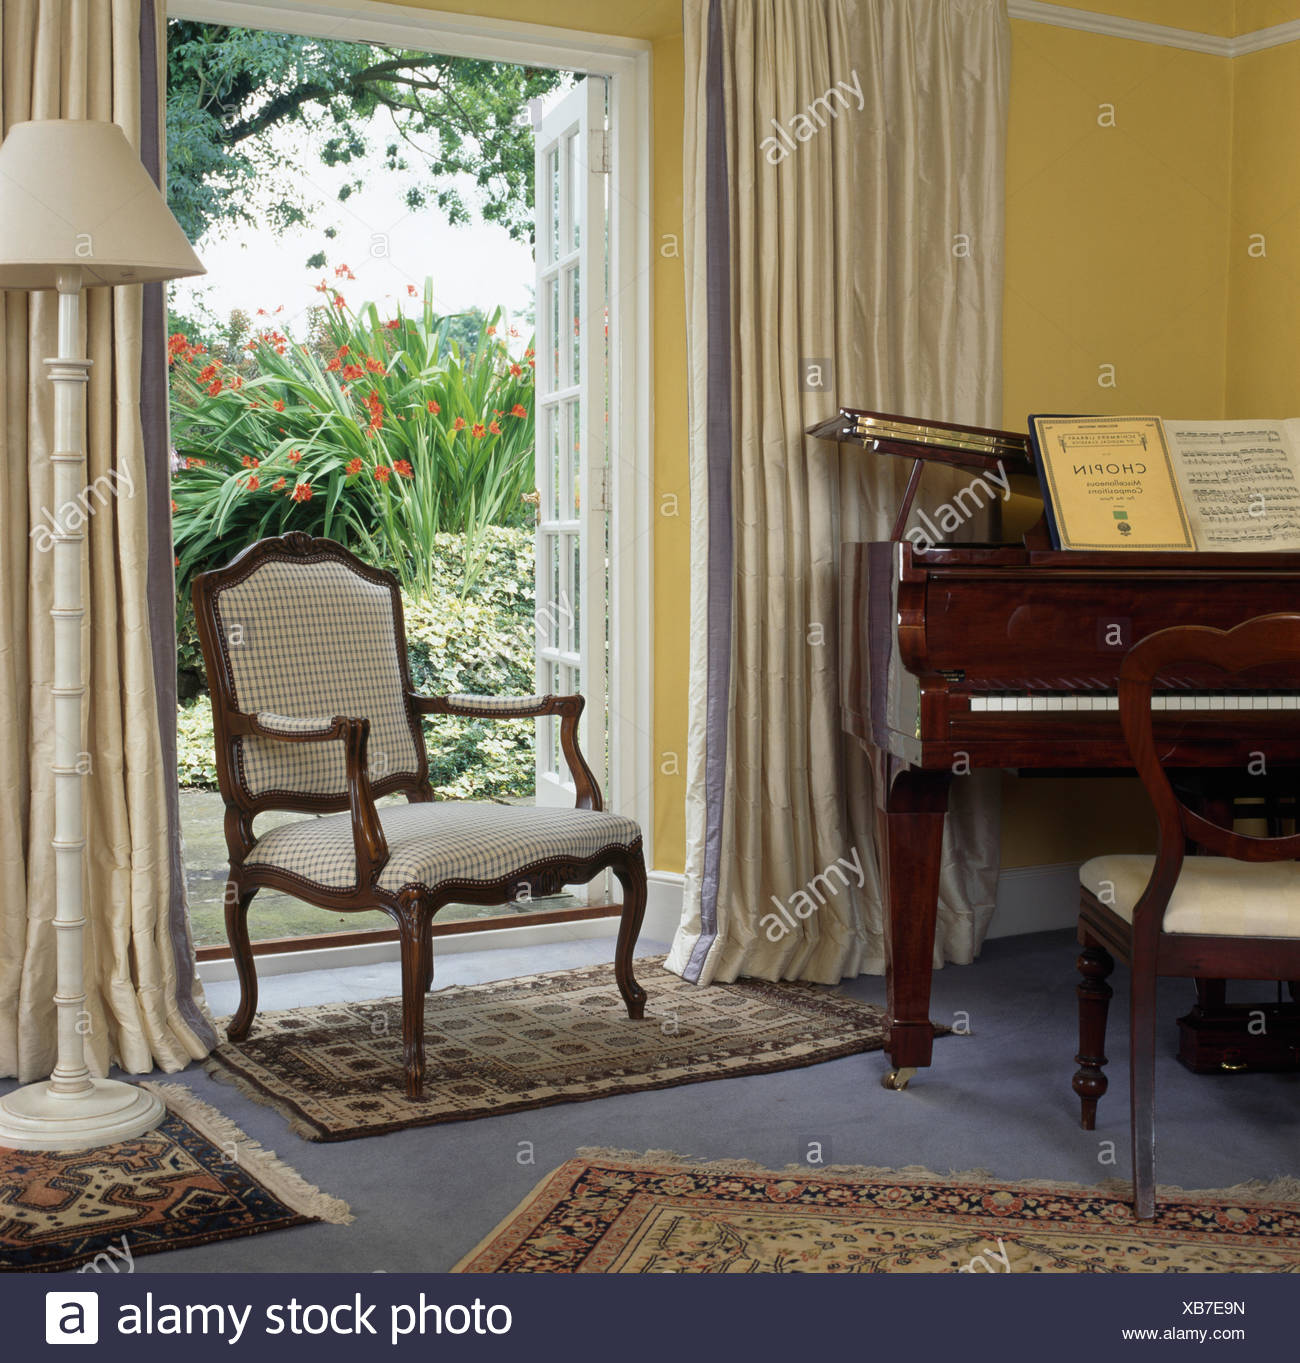 French Style Chair In Front Open French Windows With Cream Drapes